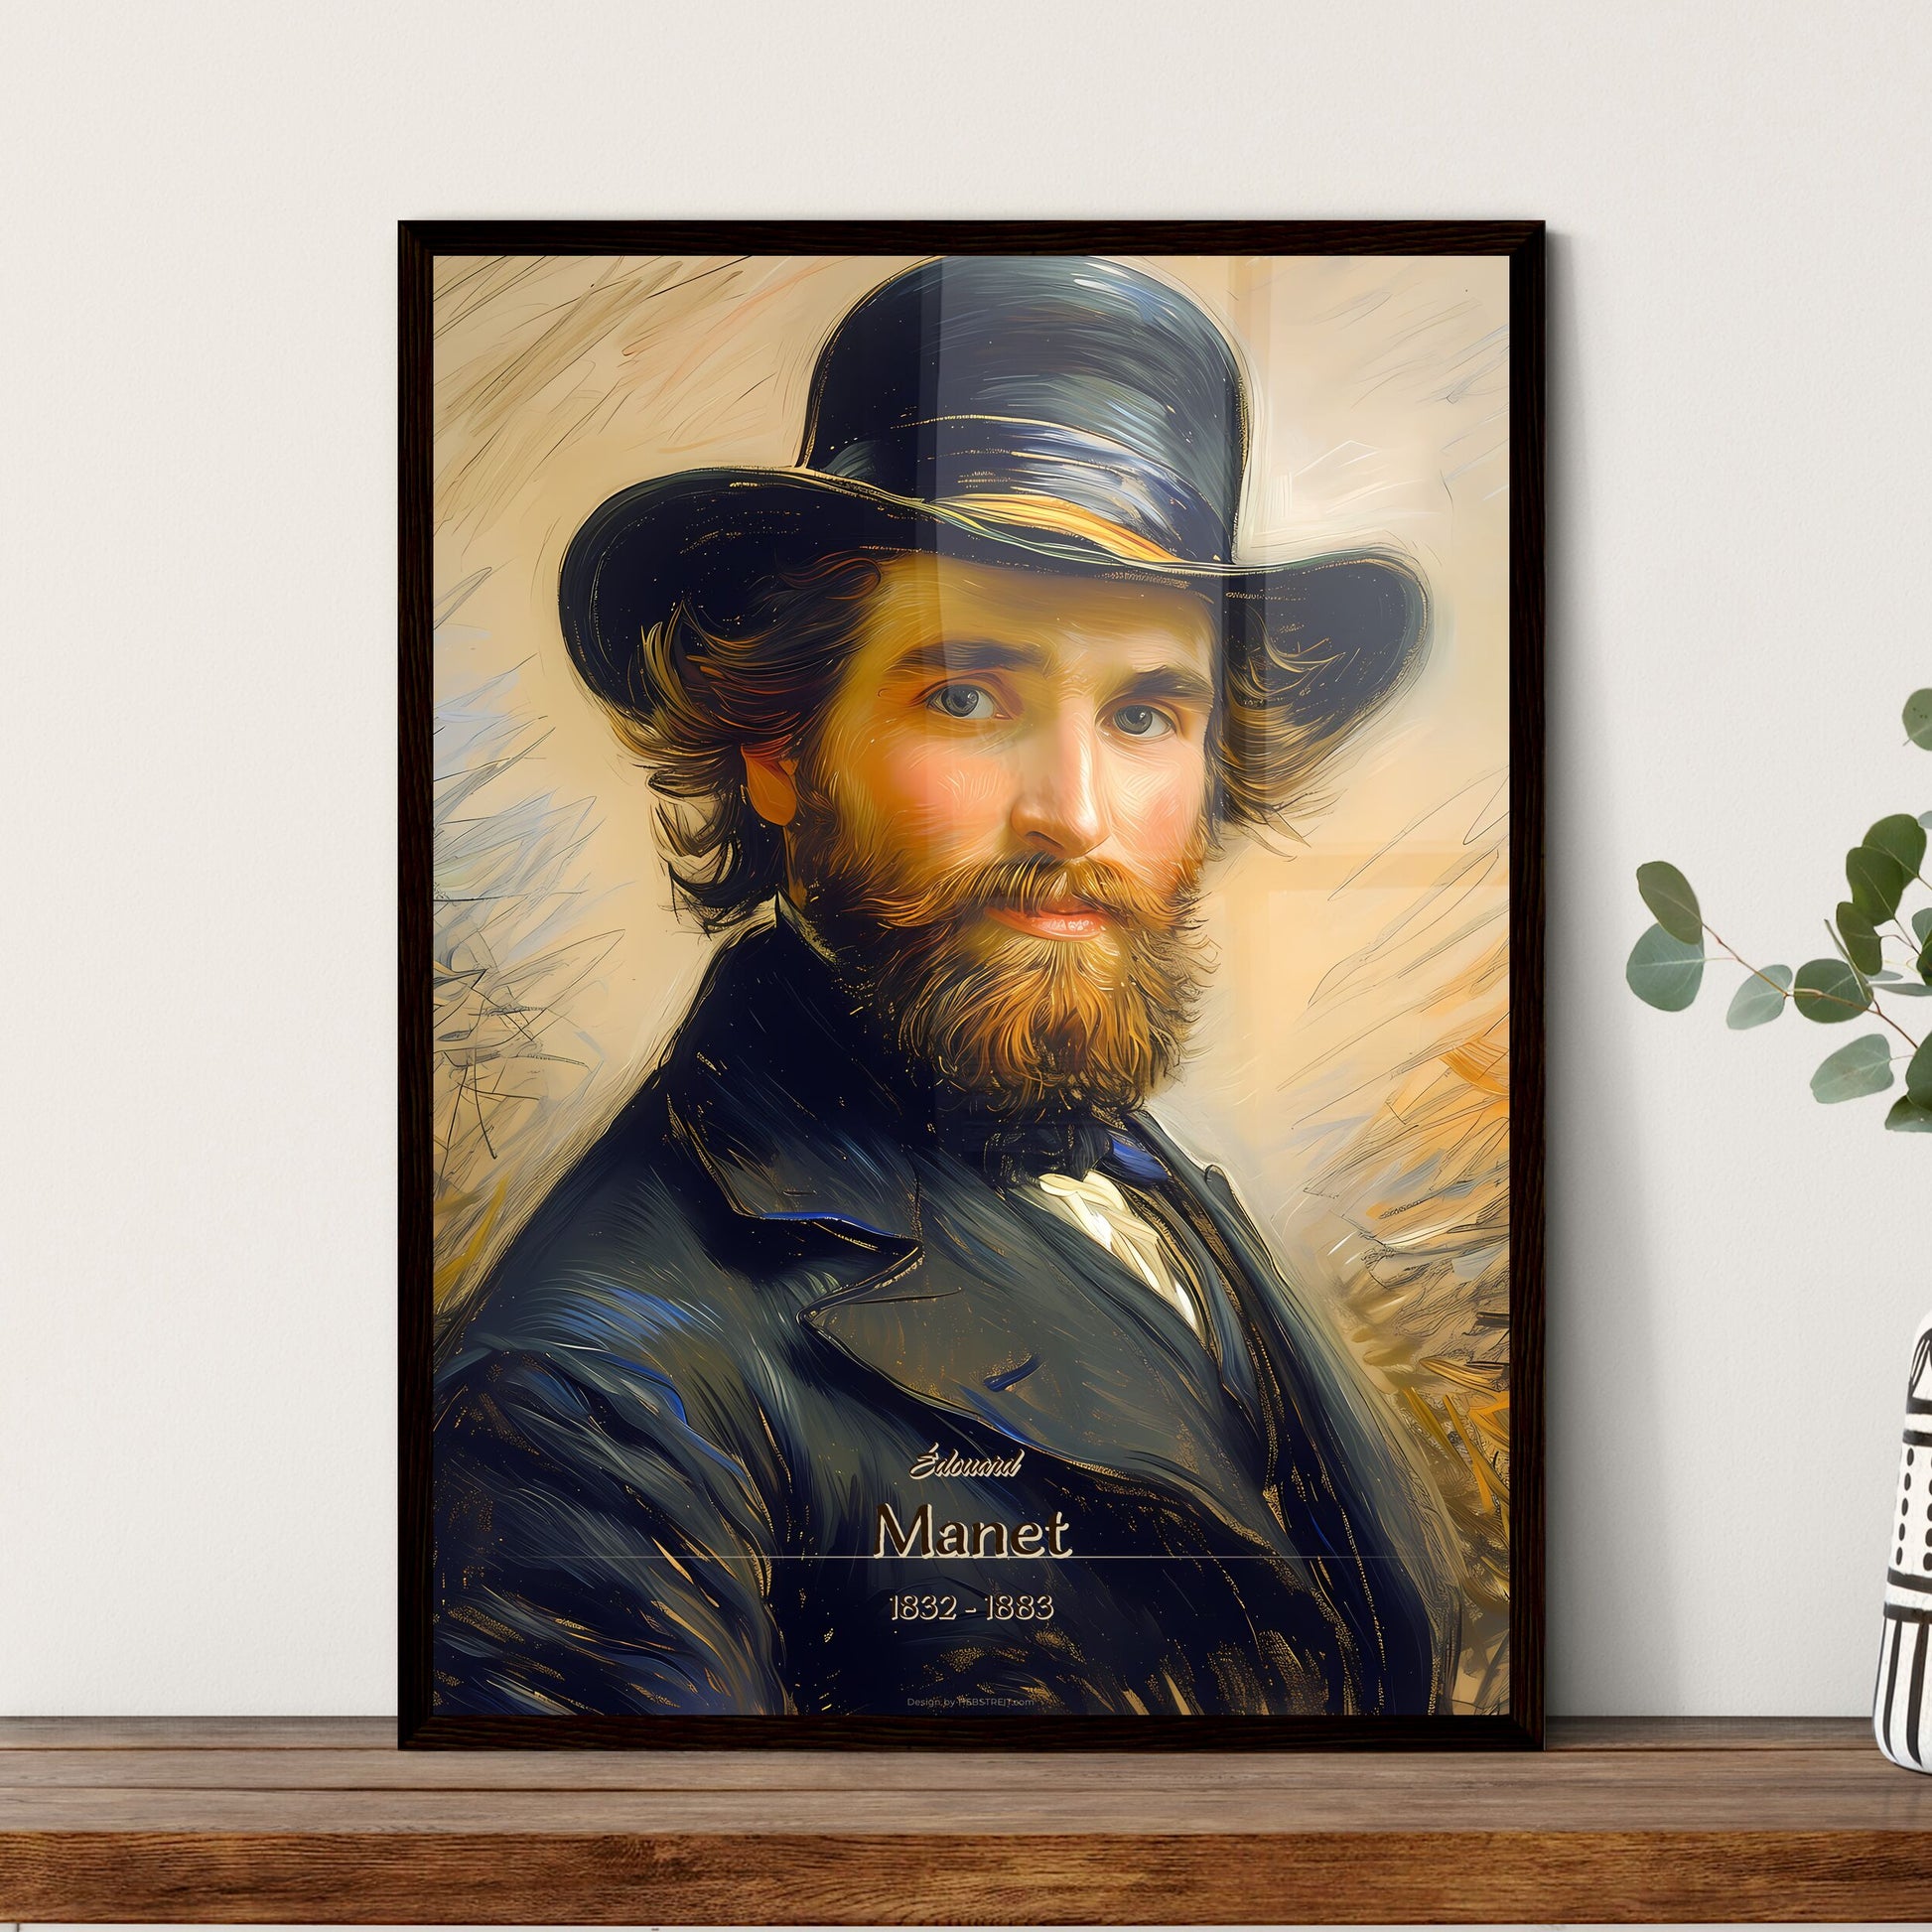 Édouard, Manet, 1832 - 1883, A Poster of a man with a beard wearing a top hat Default Title